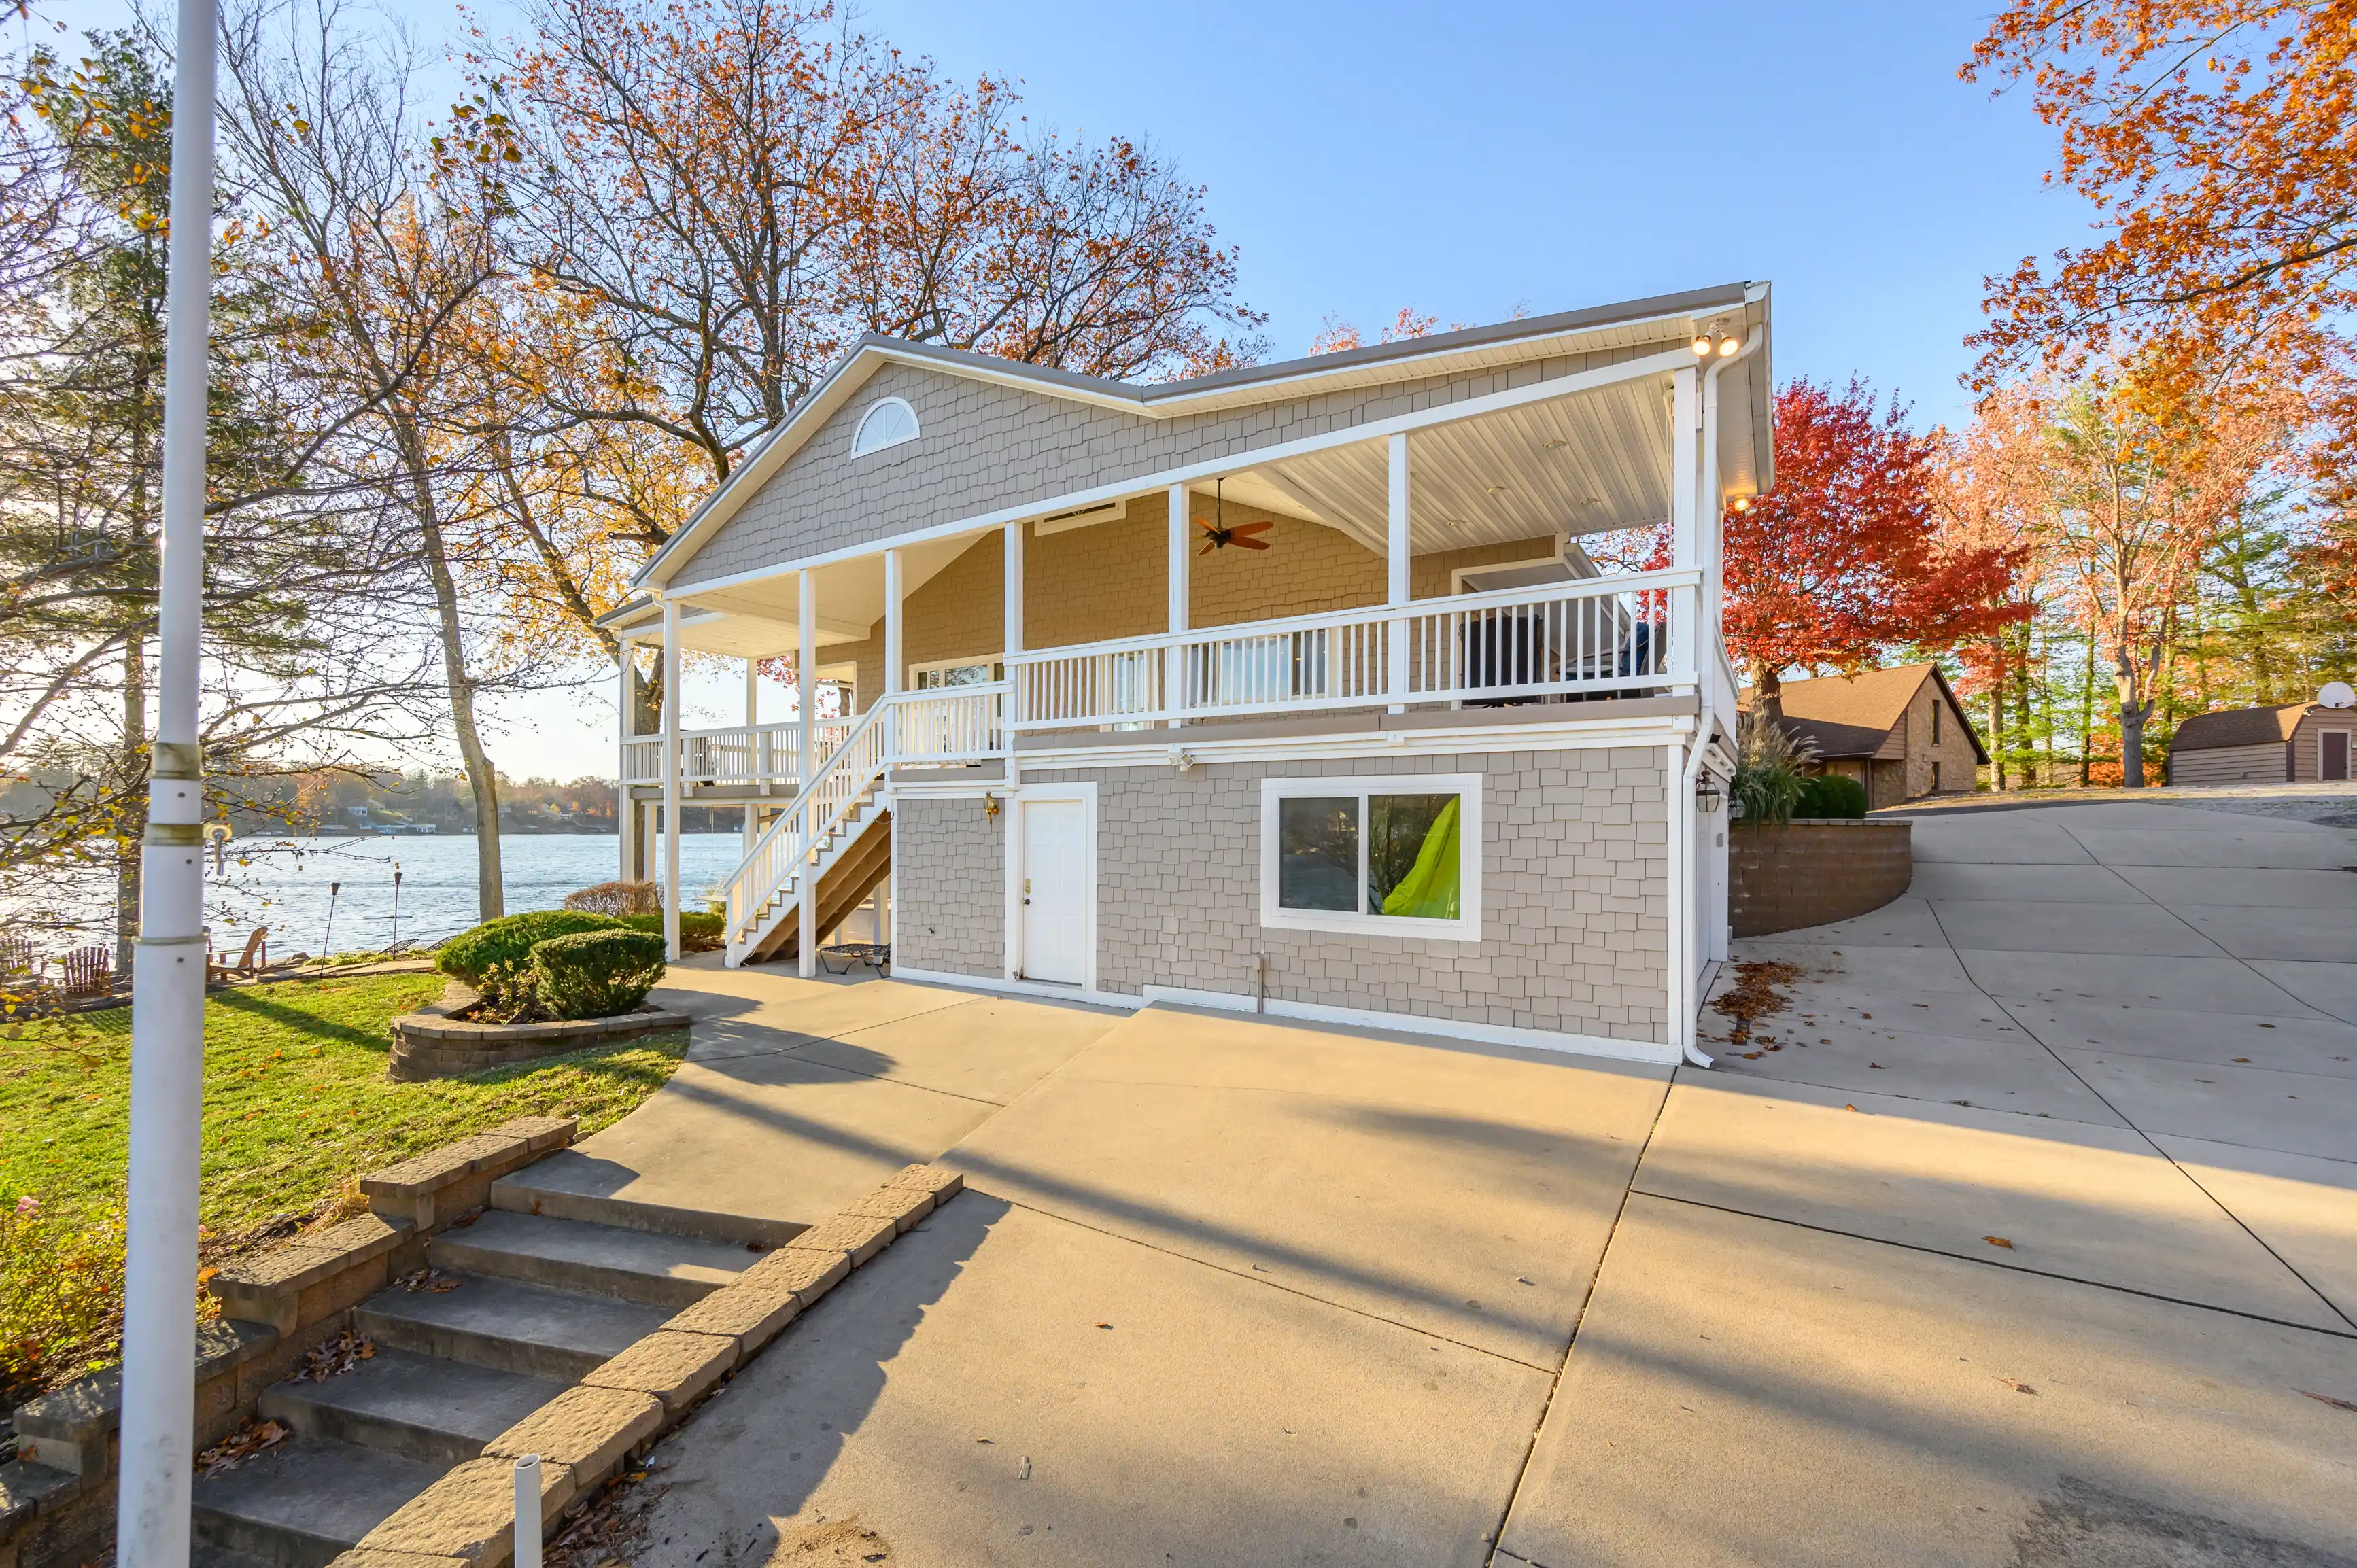 Alt: Two-story waterfront house with upper and lower white decks, autumn trees, and a clear sky.